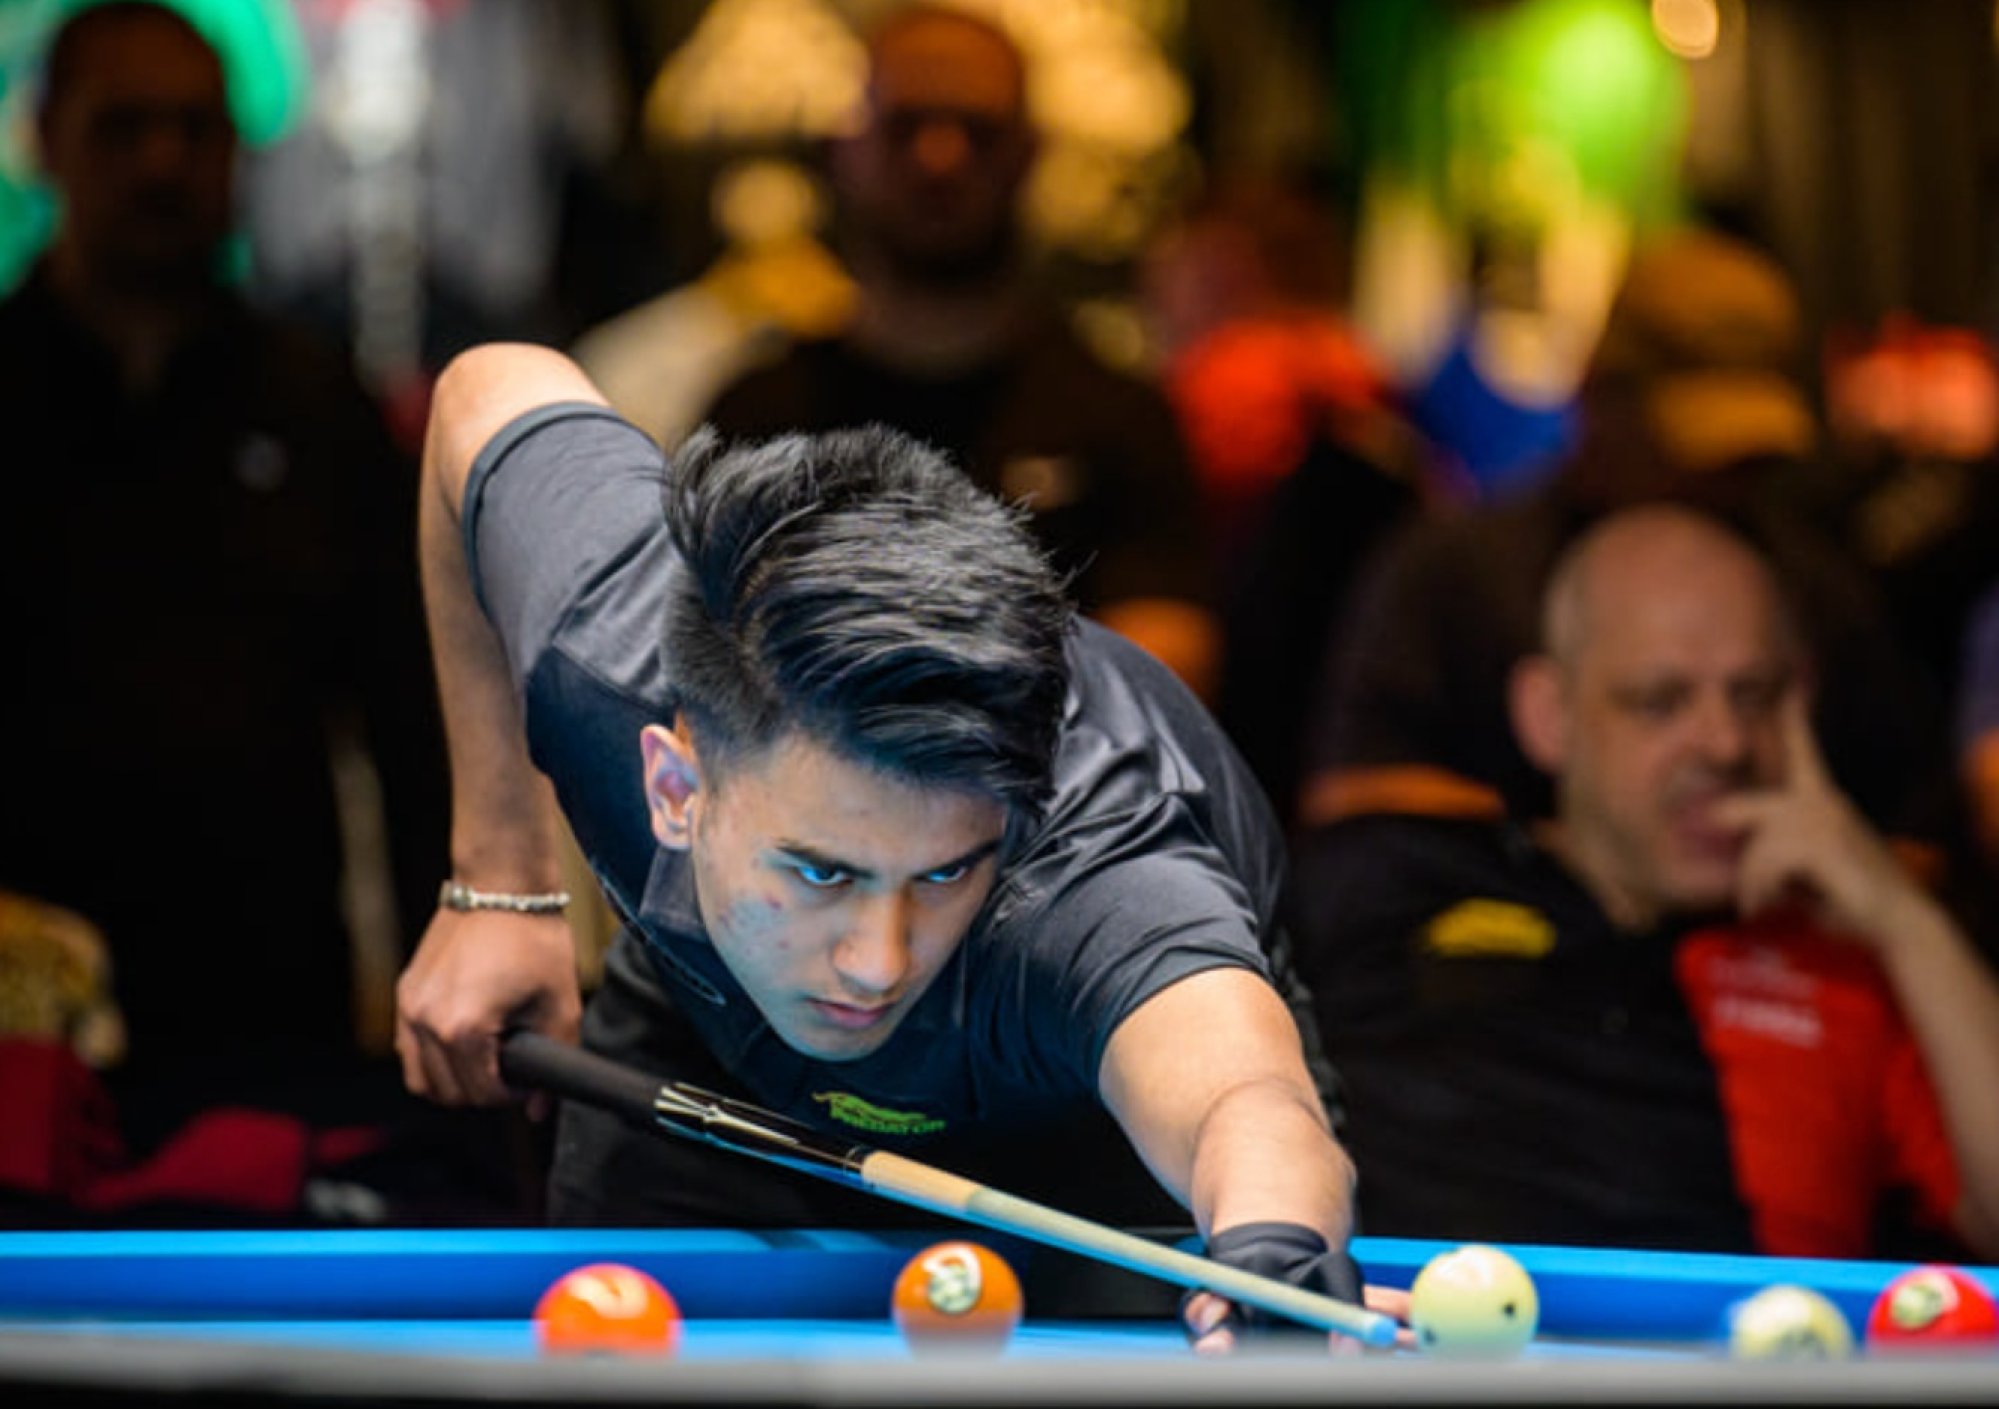 Hong Kong pool star Robbie Capito vows to be like snookers Marco Fu and inspire next generation South China Morning Post